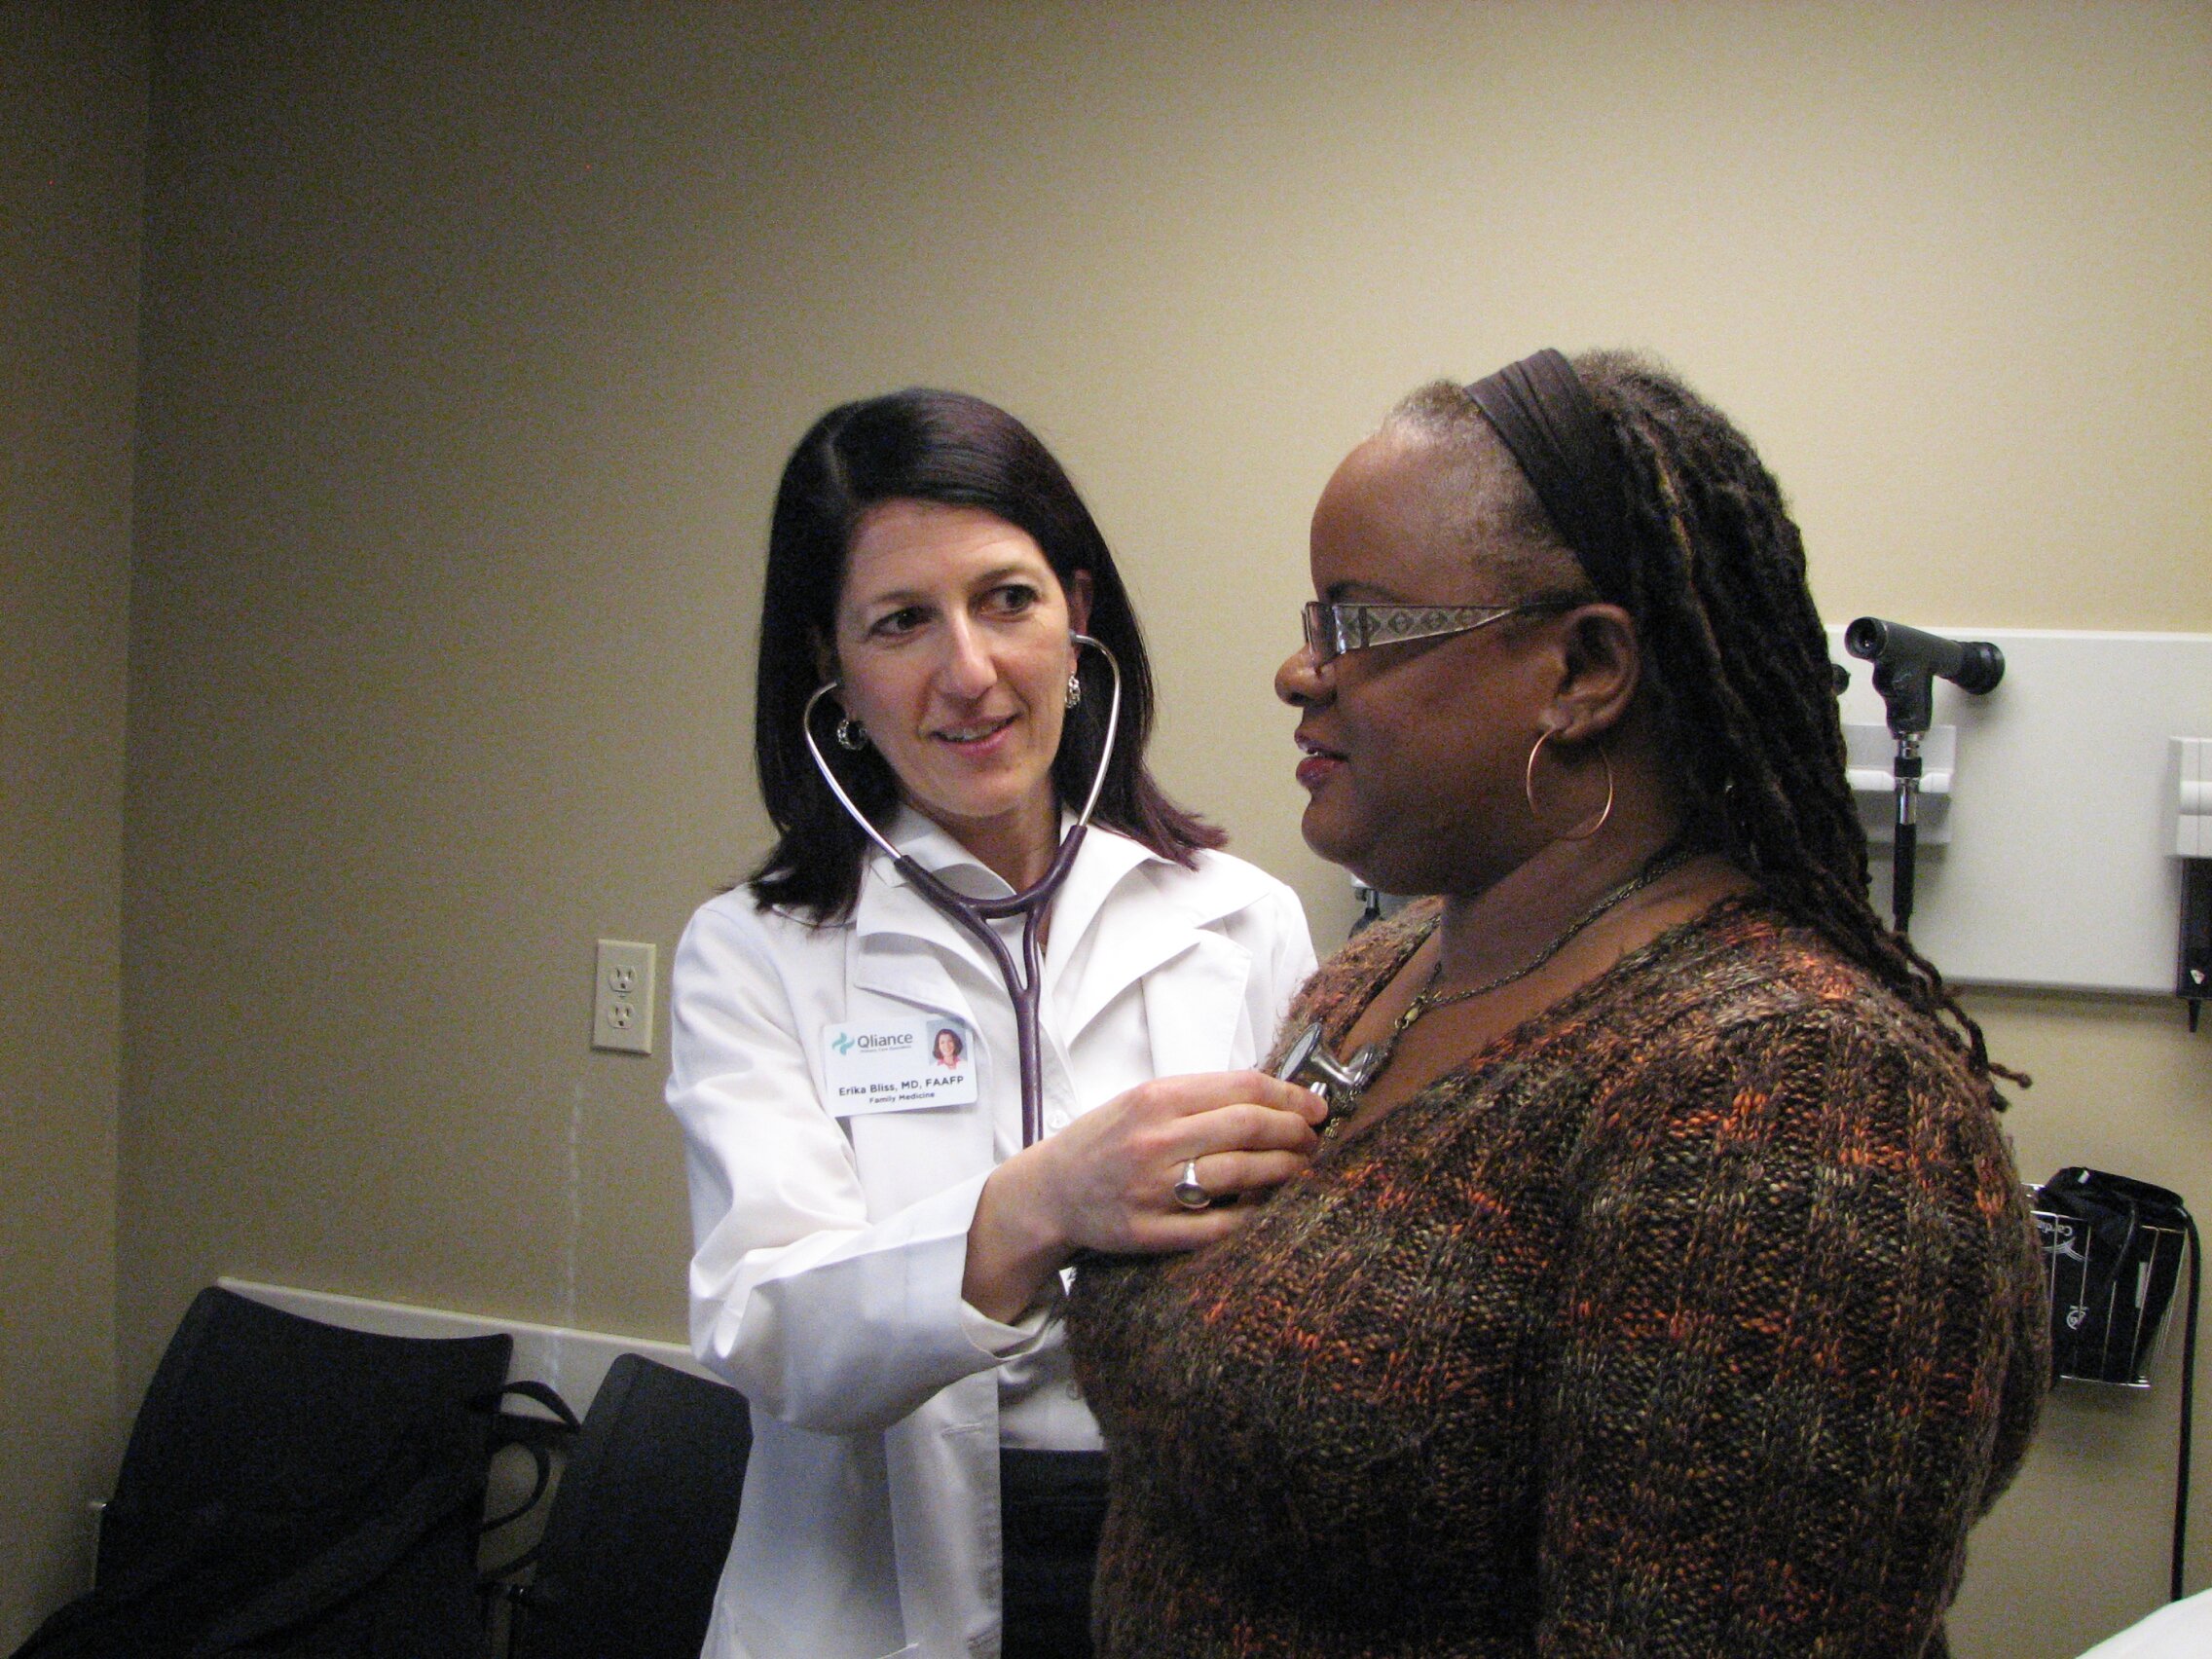 CEO Dr. Erika Bliss caring for a patient at Qliance's Seattle clinic